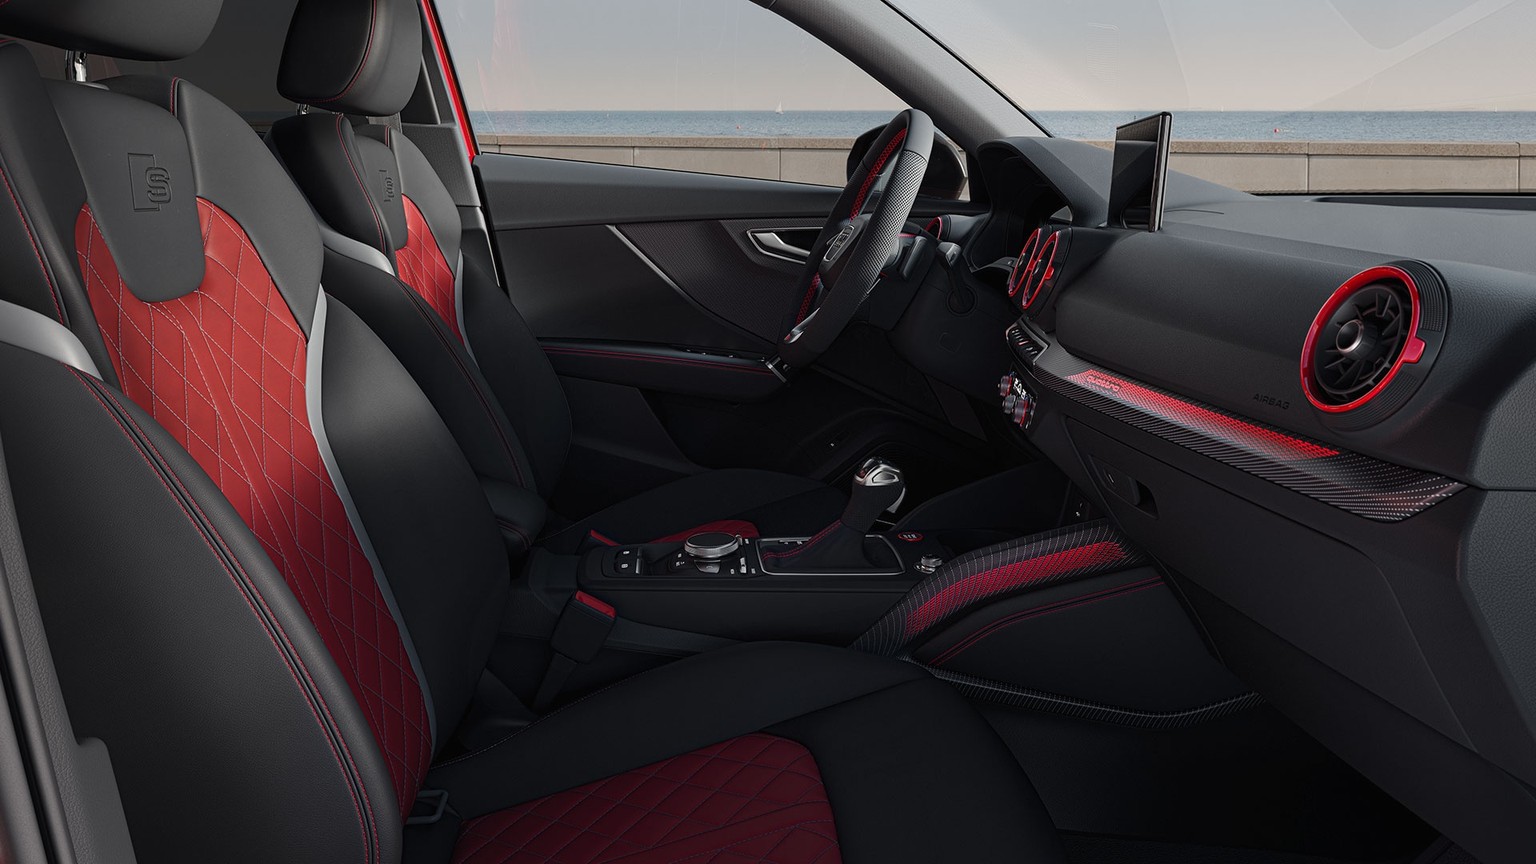 Interior front view of the Audi SQ2.